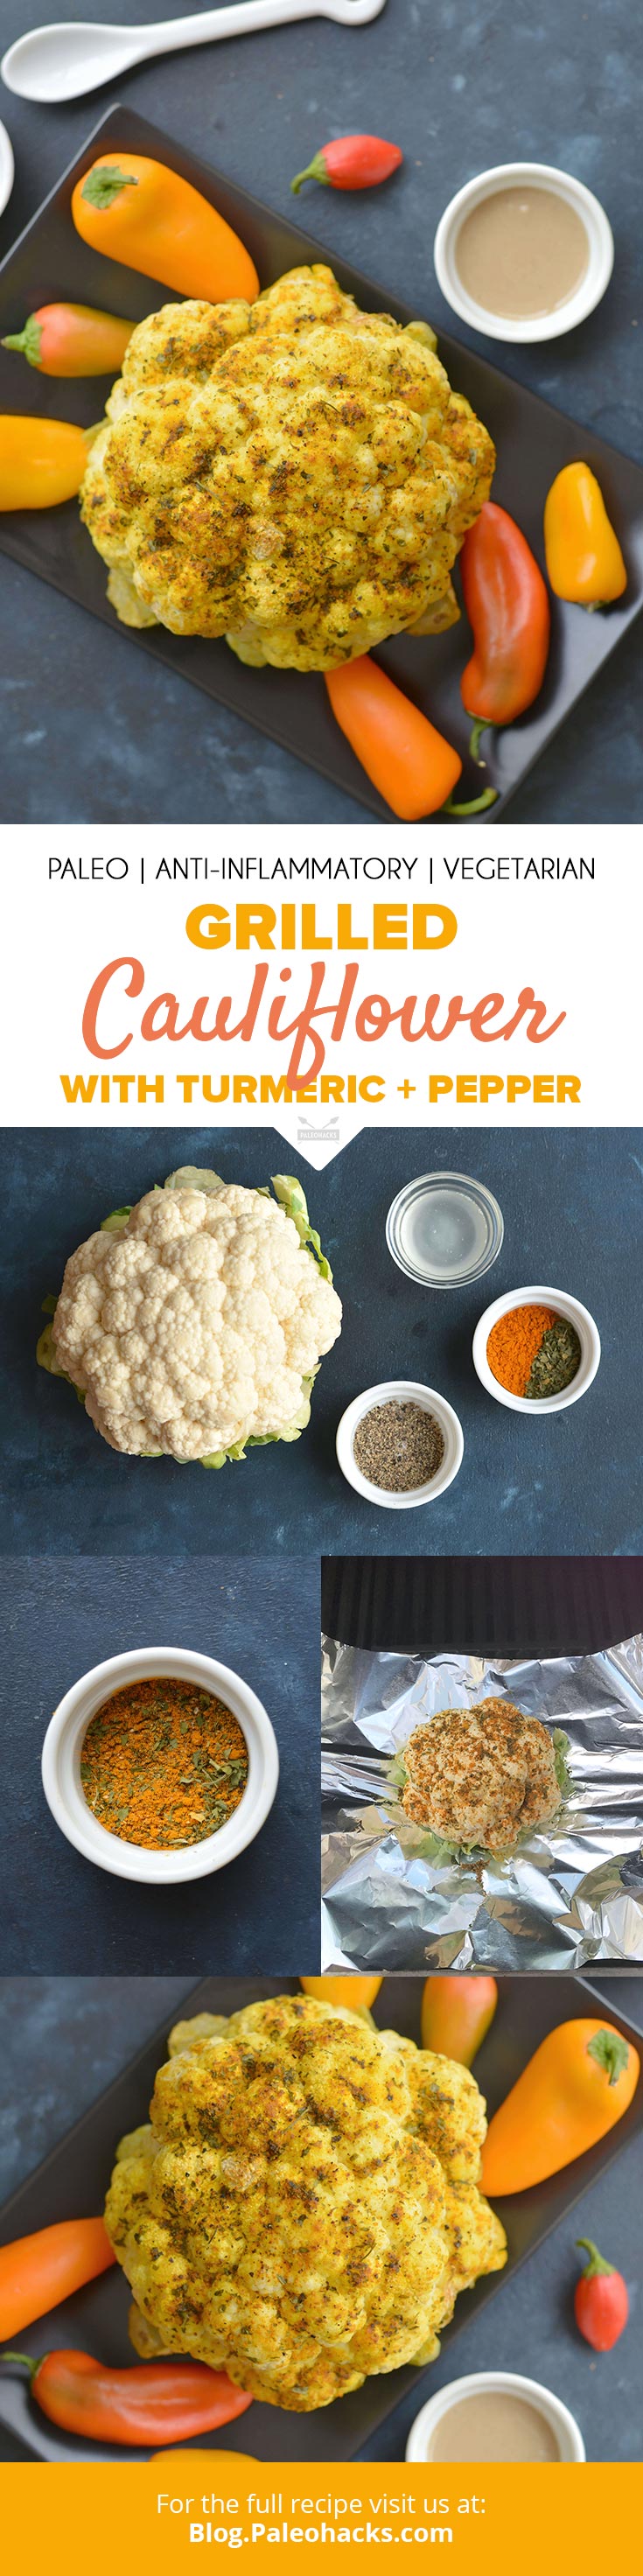 Ready to experience cauliflower in a whole new way? Throw it on the BBQ for a Grilled Cauliflower recipe you can’t resist!